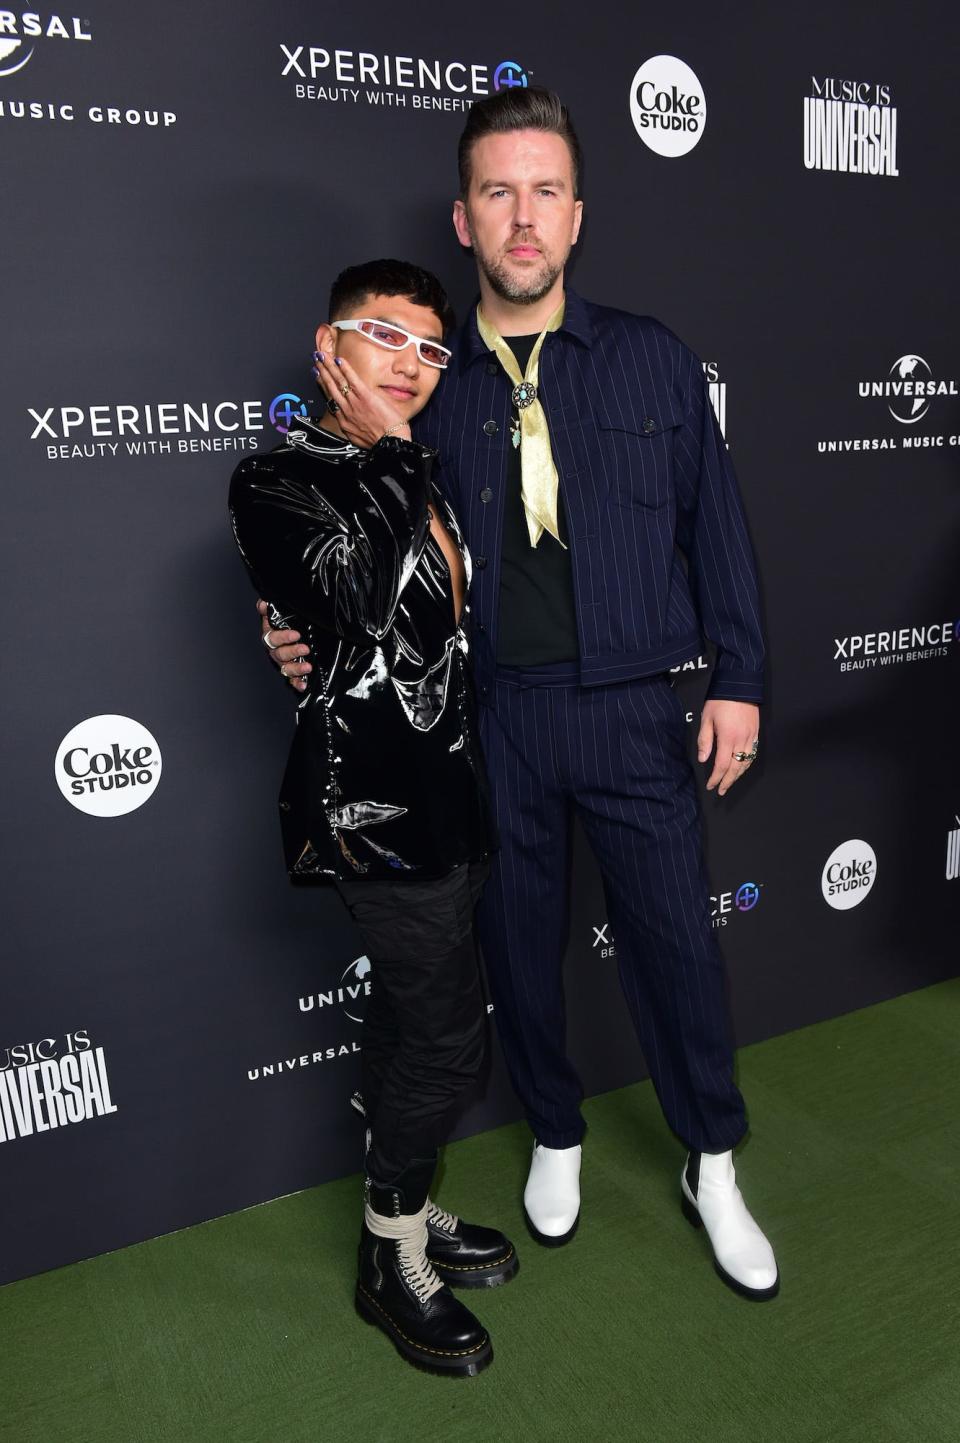 Abi Ventura and T.J. Osborne at the Universal Music Group Grammy after party on February 5, 2023.